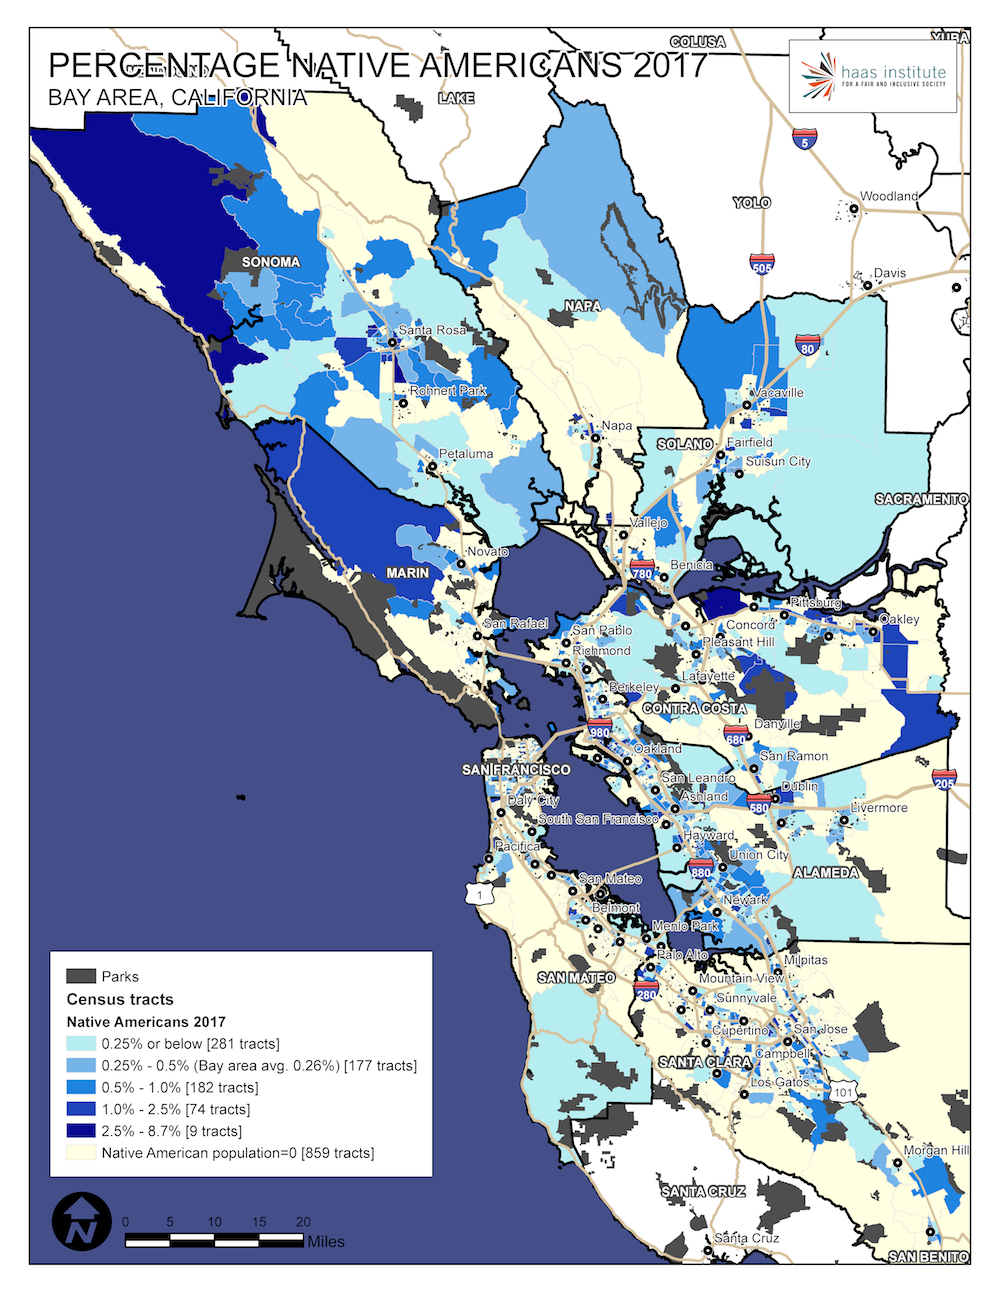 Map shows Native American population in the Bay Area in 2017